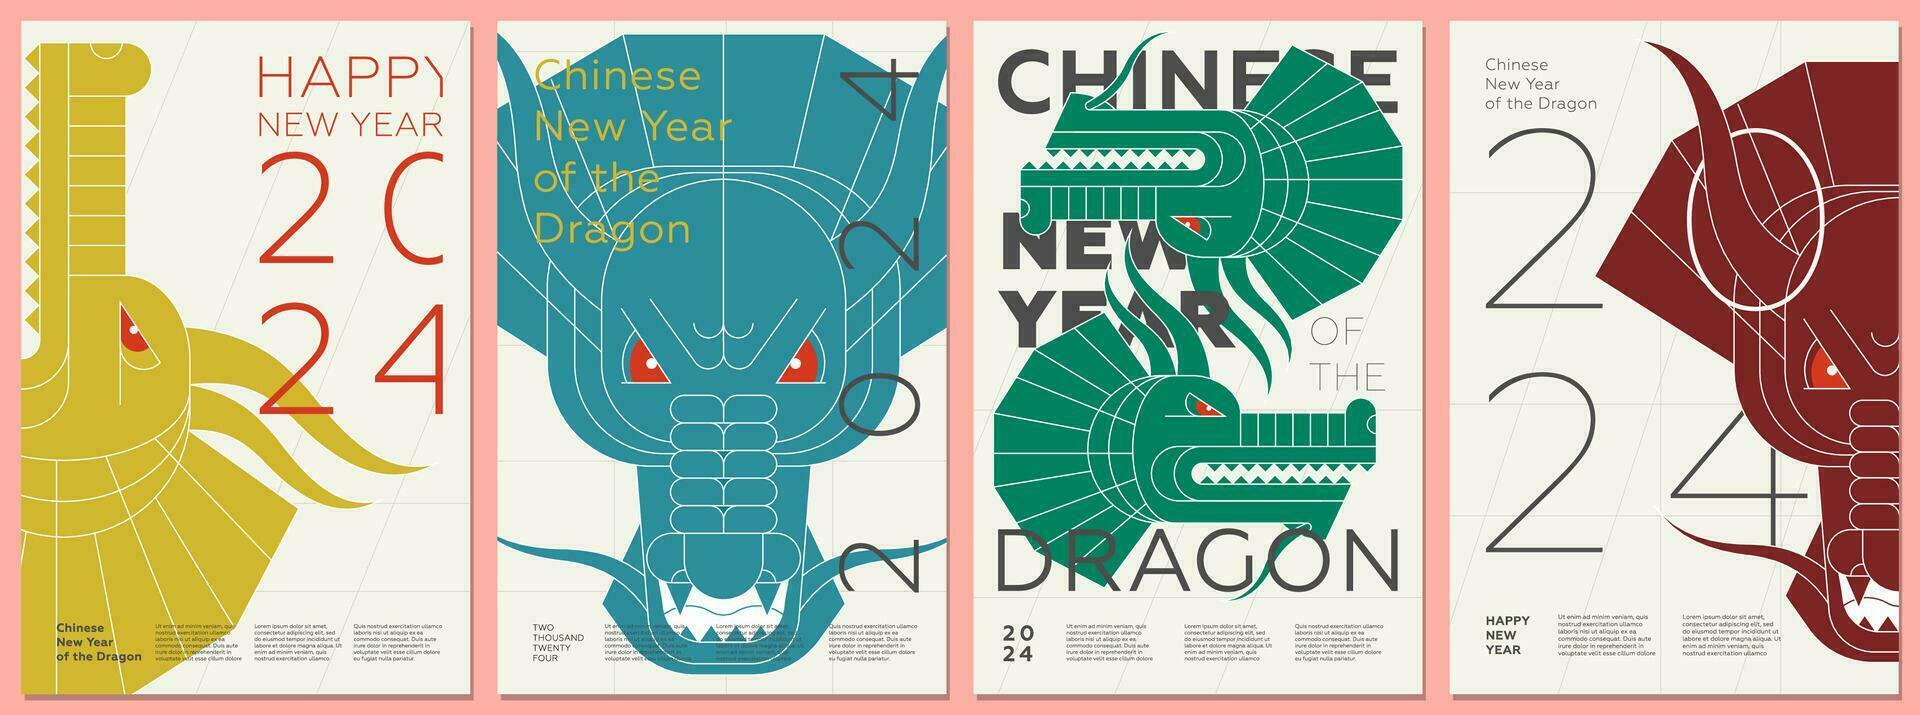 Abstract Chinese dragons heads on 2024 Happy New Year posters. Colored creative China zodiac dragon monster faces on flyers. Graphic asian celebration colorful prints. Modern trendy oriental paintings vector